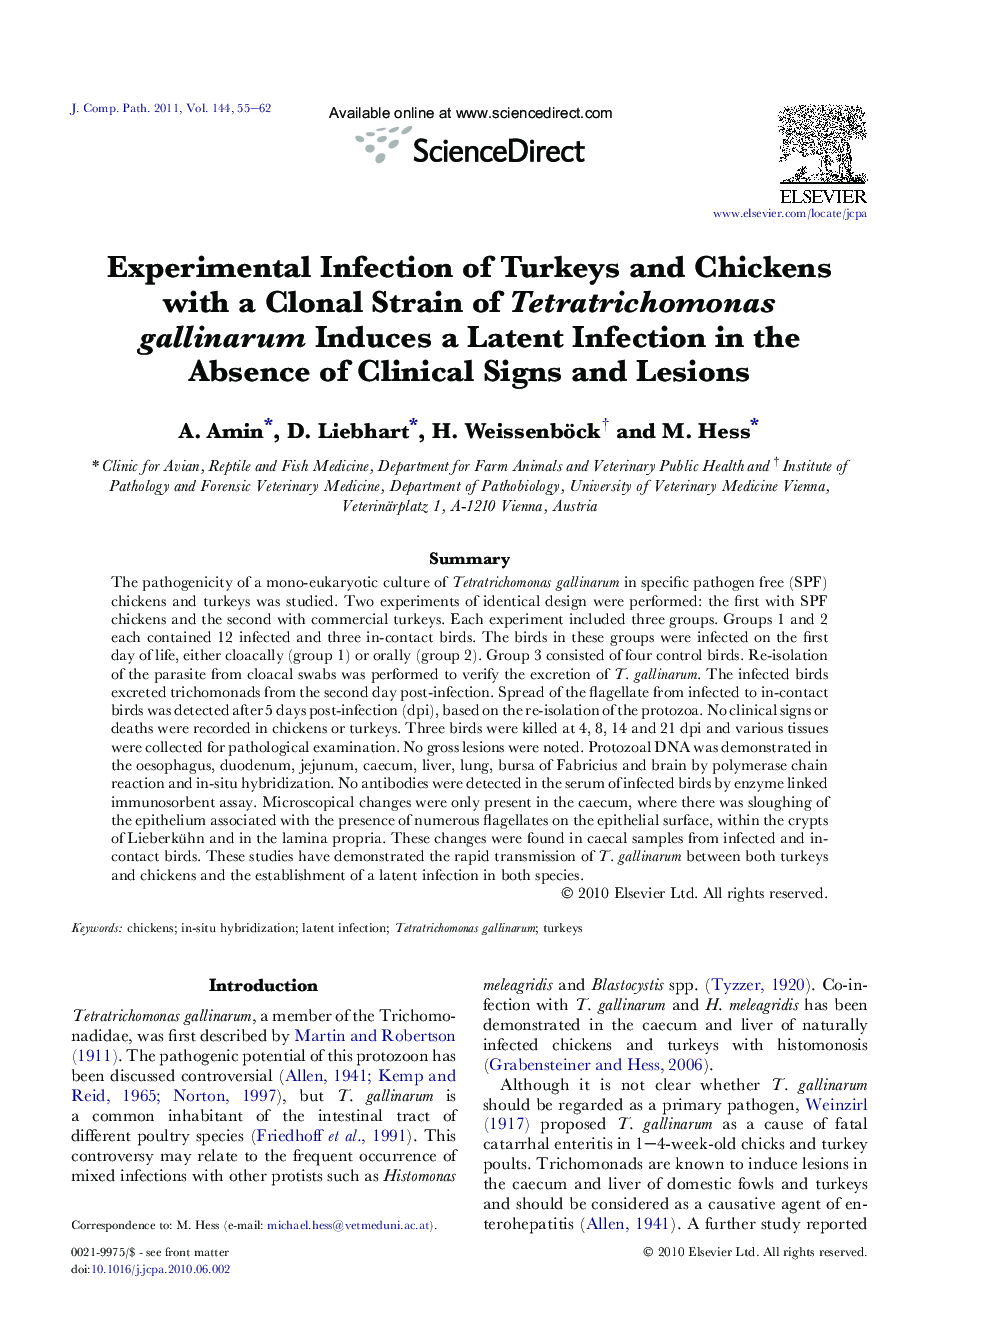 Experimental Infection of Turkeys and Chickens with a Clonal Strain of Tetratrichomonas gallinarum Induces a Latent Infection in the Absence of Clinical Signs and Lesions